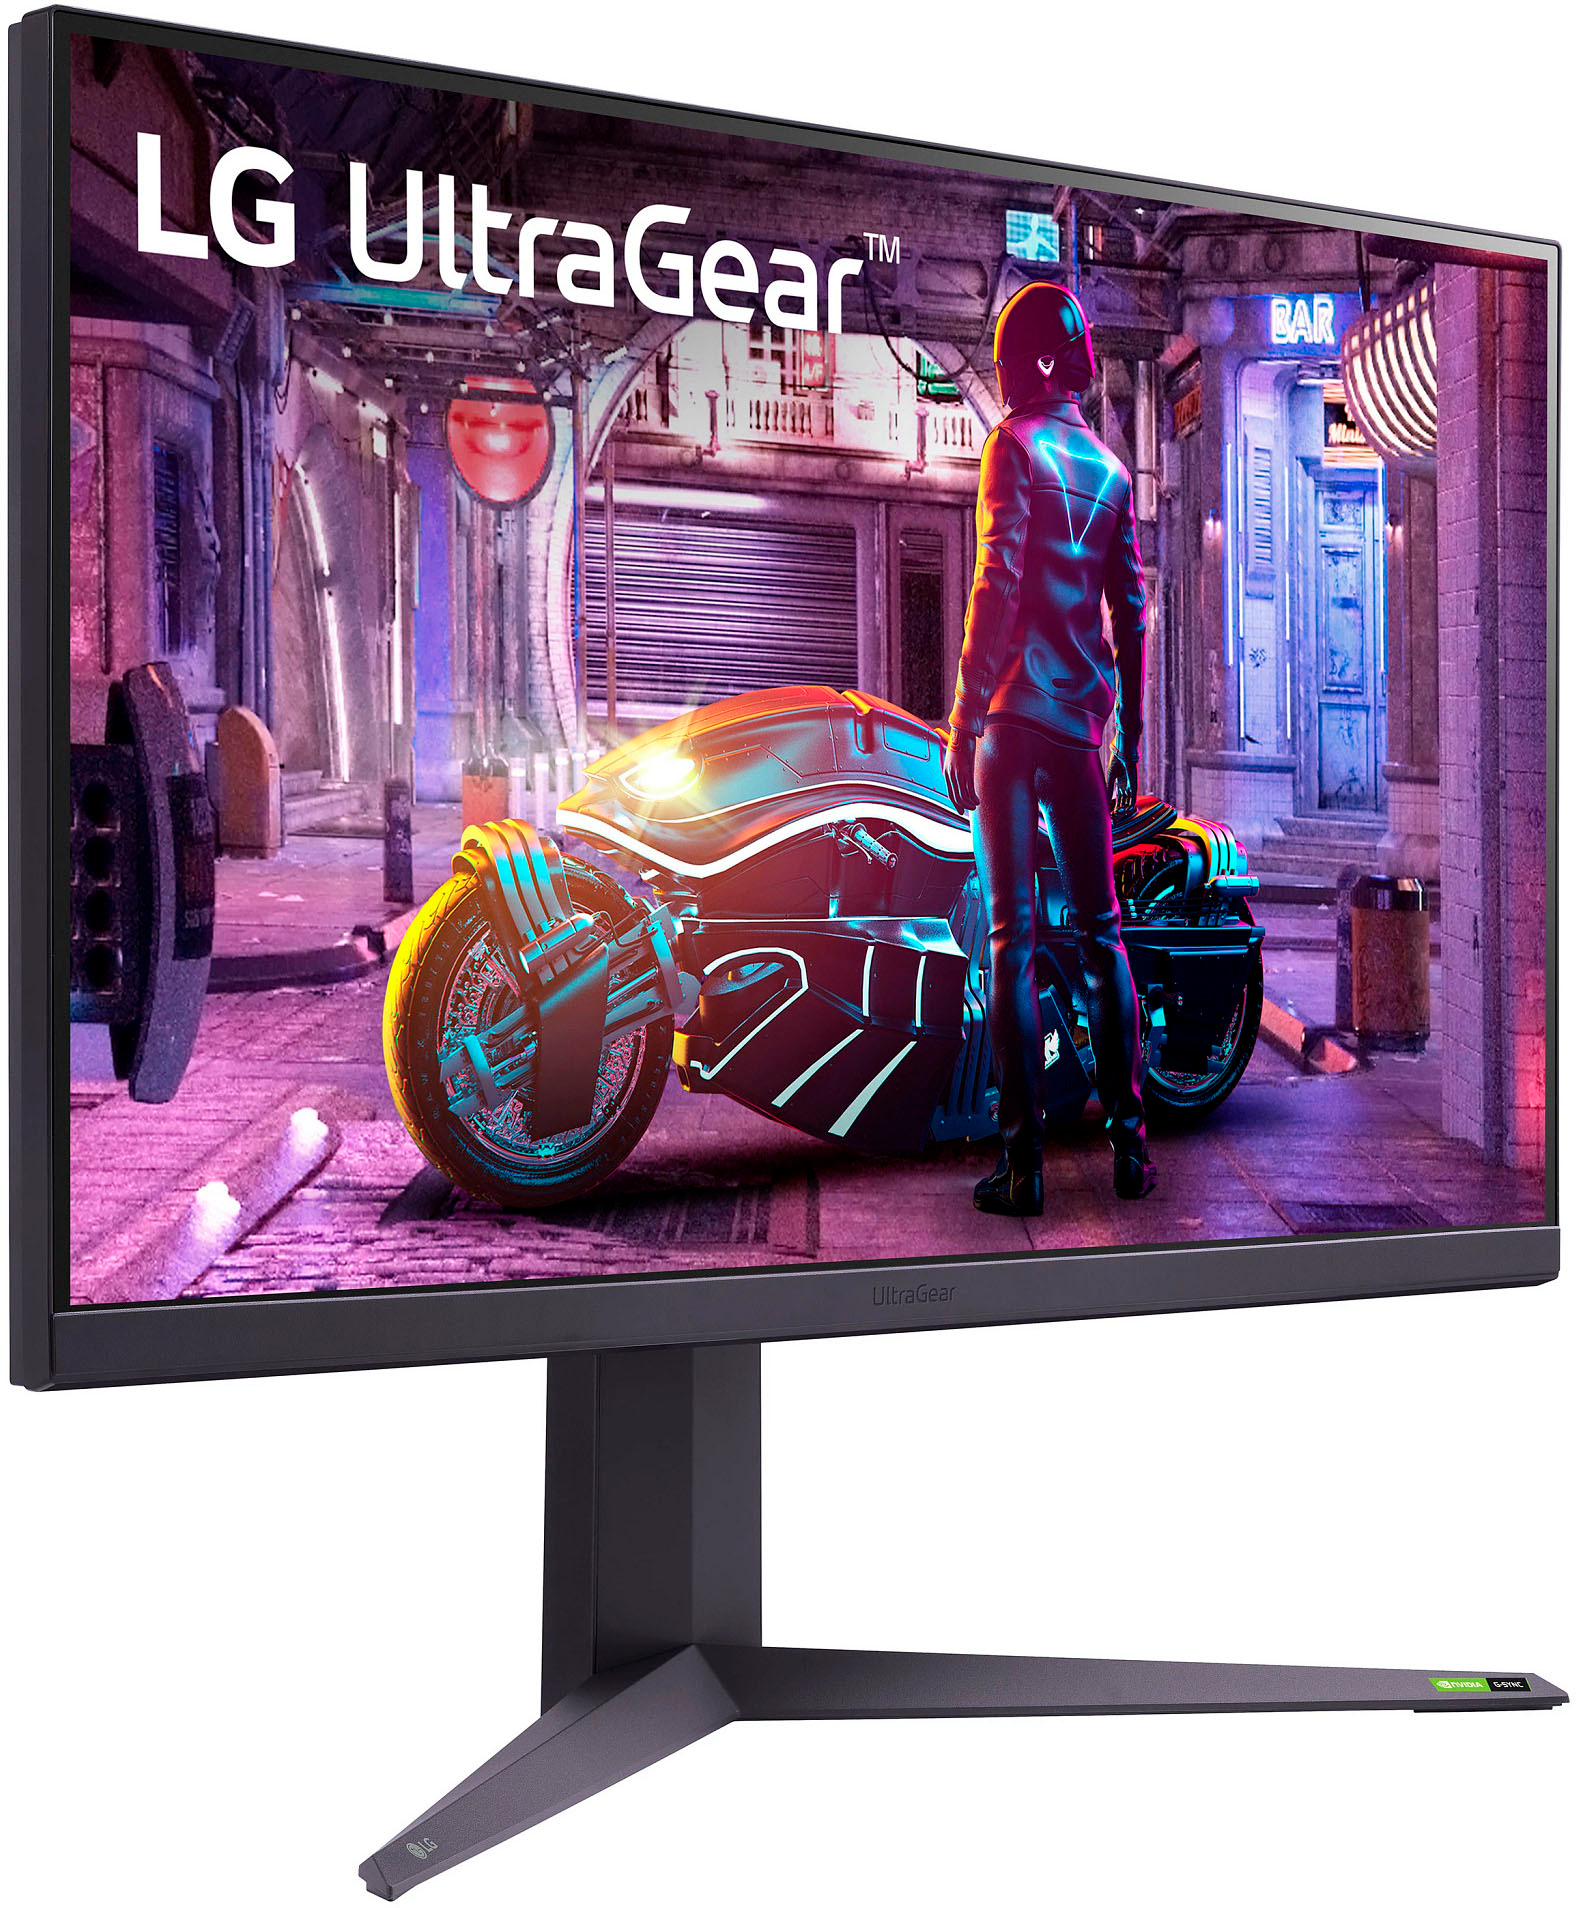 Back View: LG - UltraGear 32" IPS LED QHD G-SYNC Compatible and AMD FreeSync Premium Pro Monitor with HDR (HDMI, DisplayPort)